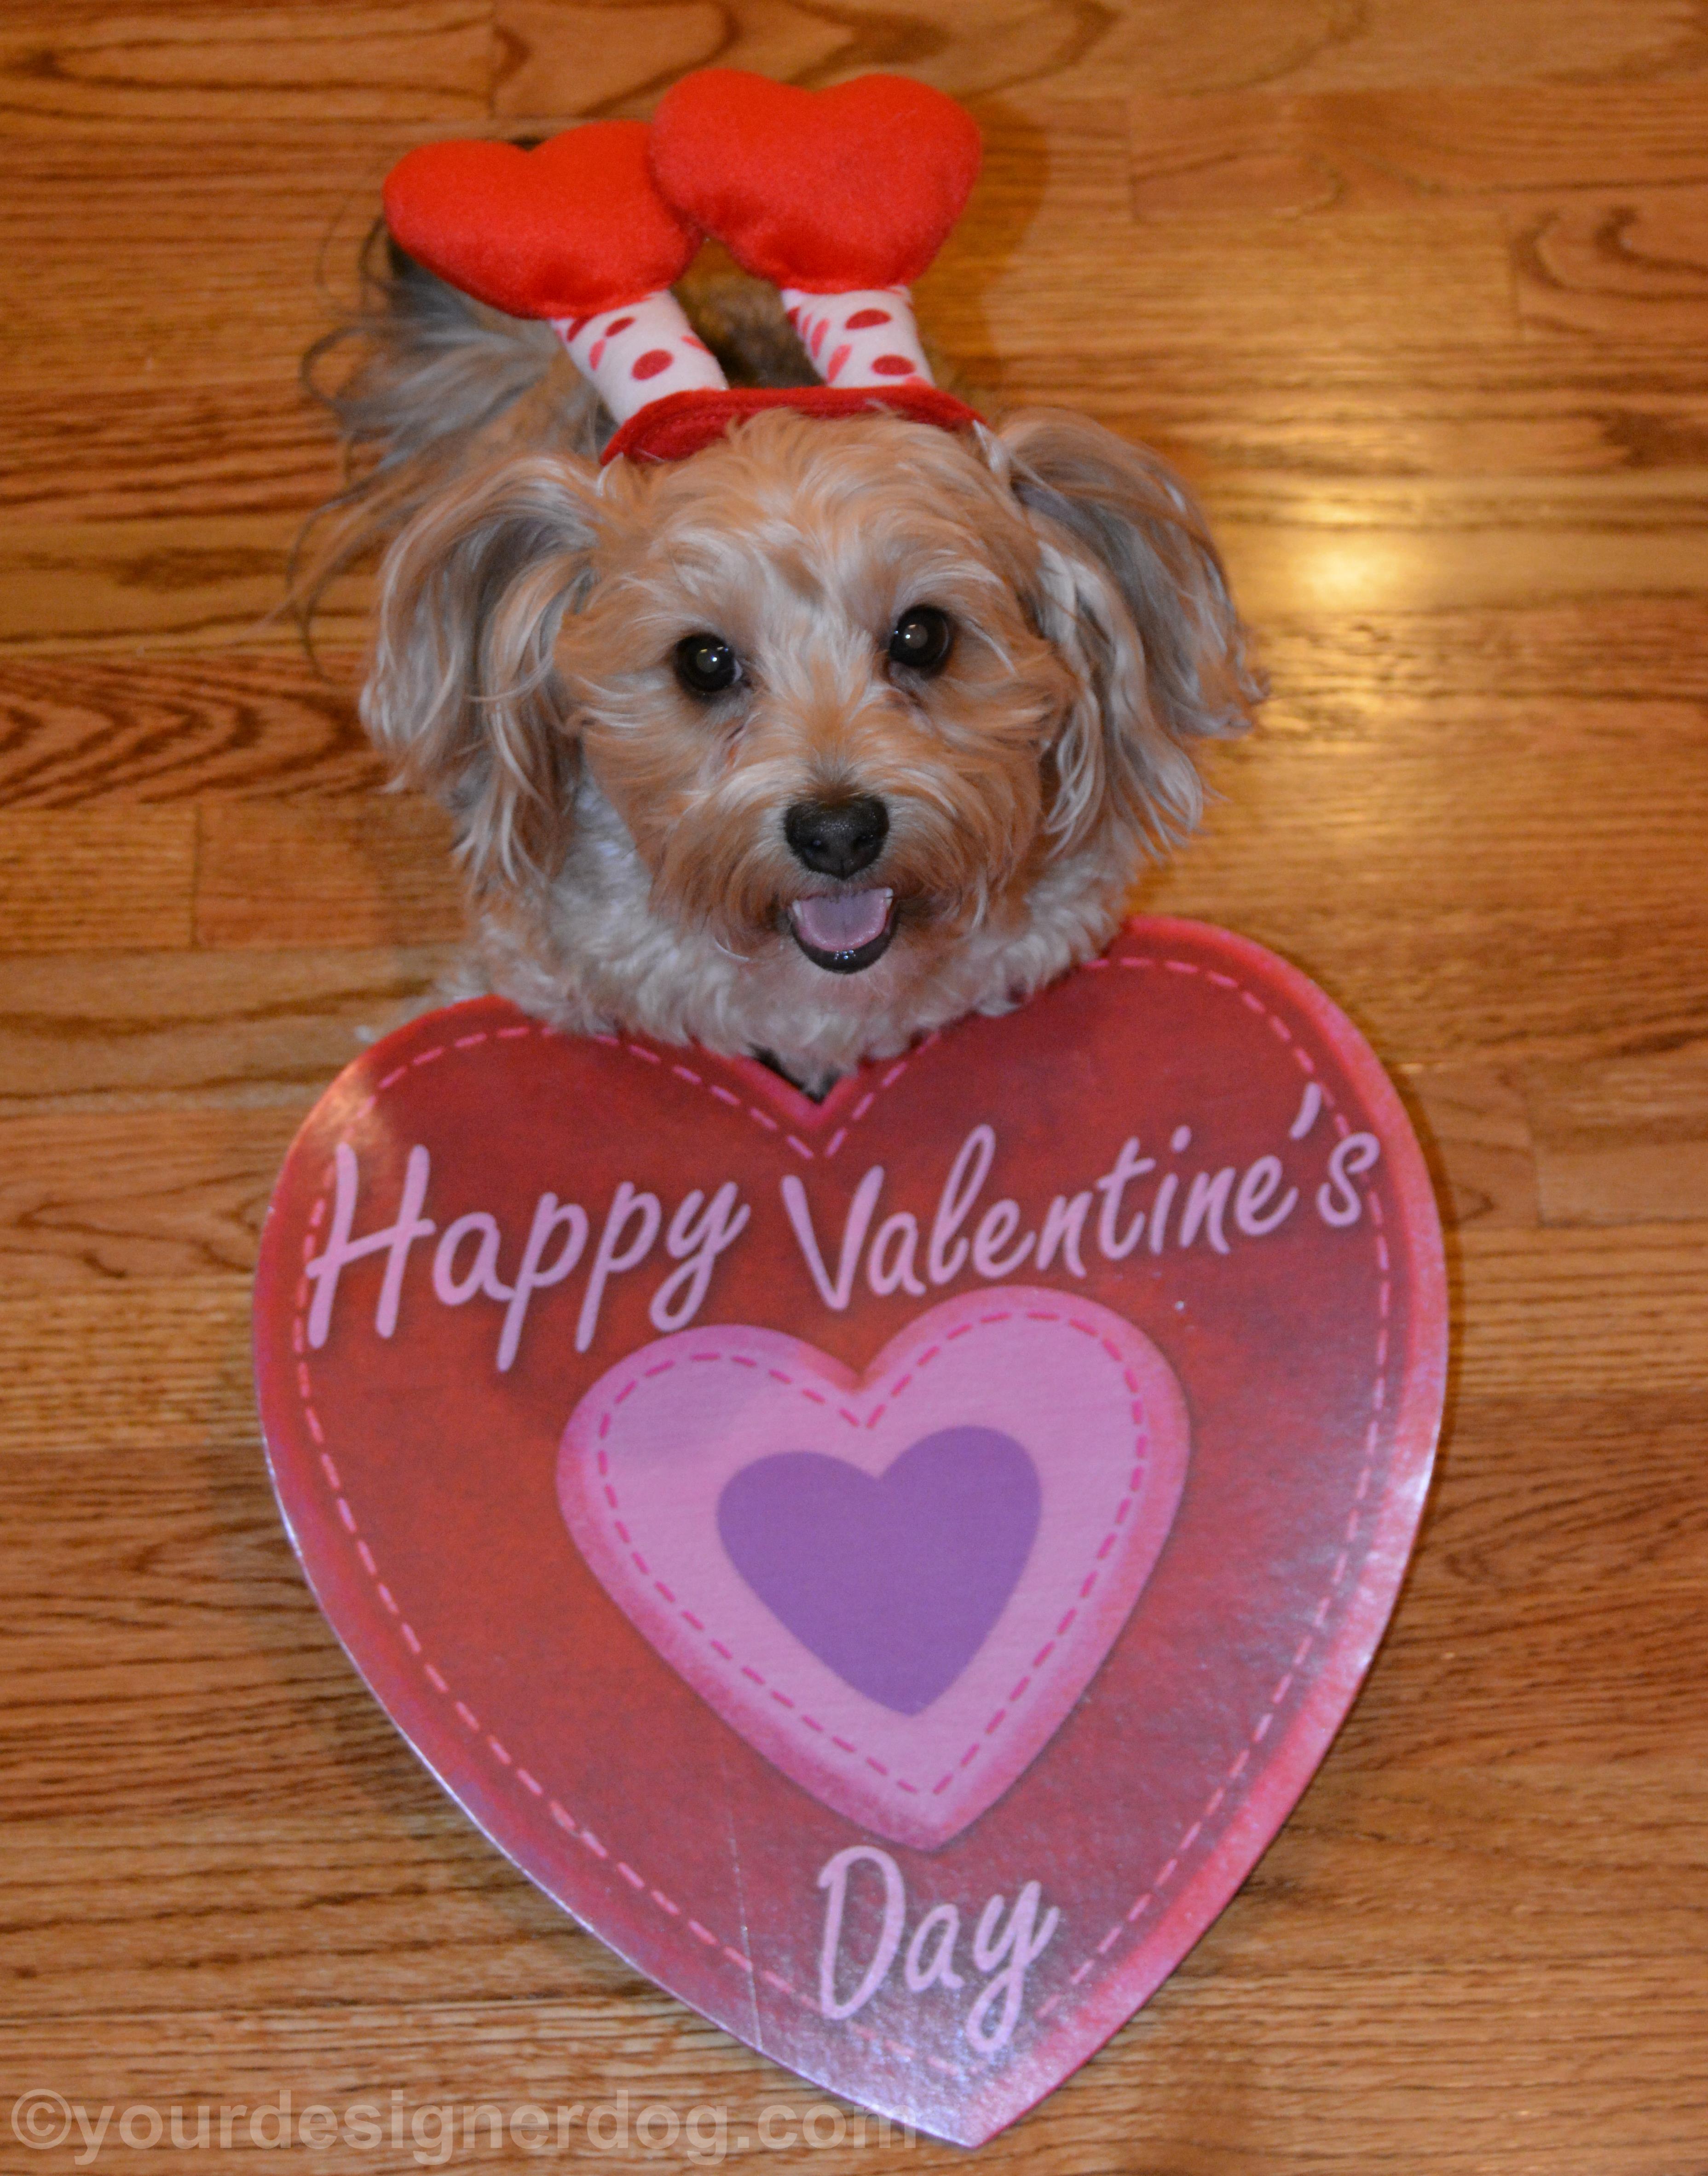 dogs, designer dogs, yorkipoo, yorkie poo, cutie pie, tongue out, dog smiling, valentine's day